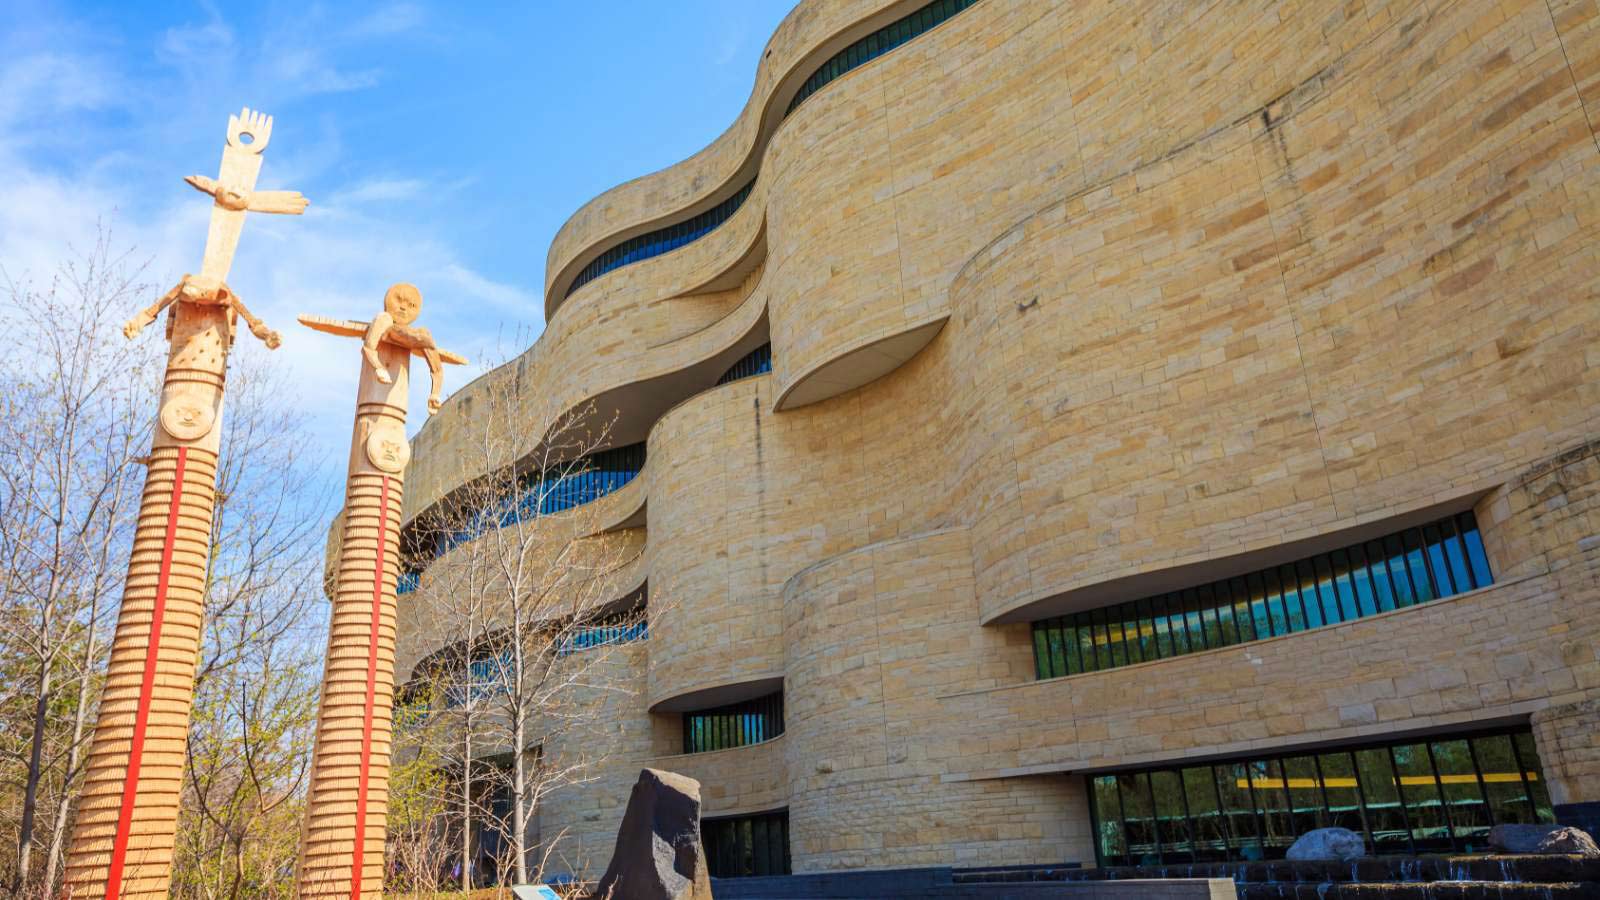 <p>Located in Washington D.C., the National Museum of the American Indian is a newer museum that was only opened in 1989. It houses permanent and temporary exhibits that showcase the diverse heritage and history of the North and South American Indians. This museum is the largest of its kind in the world and is worth visiting.</p>